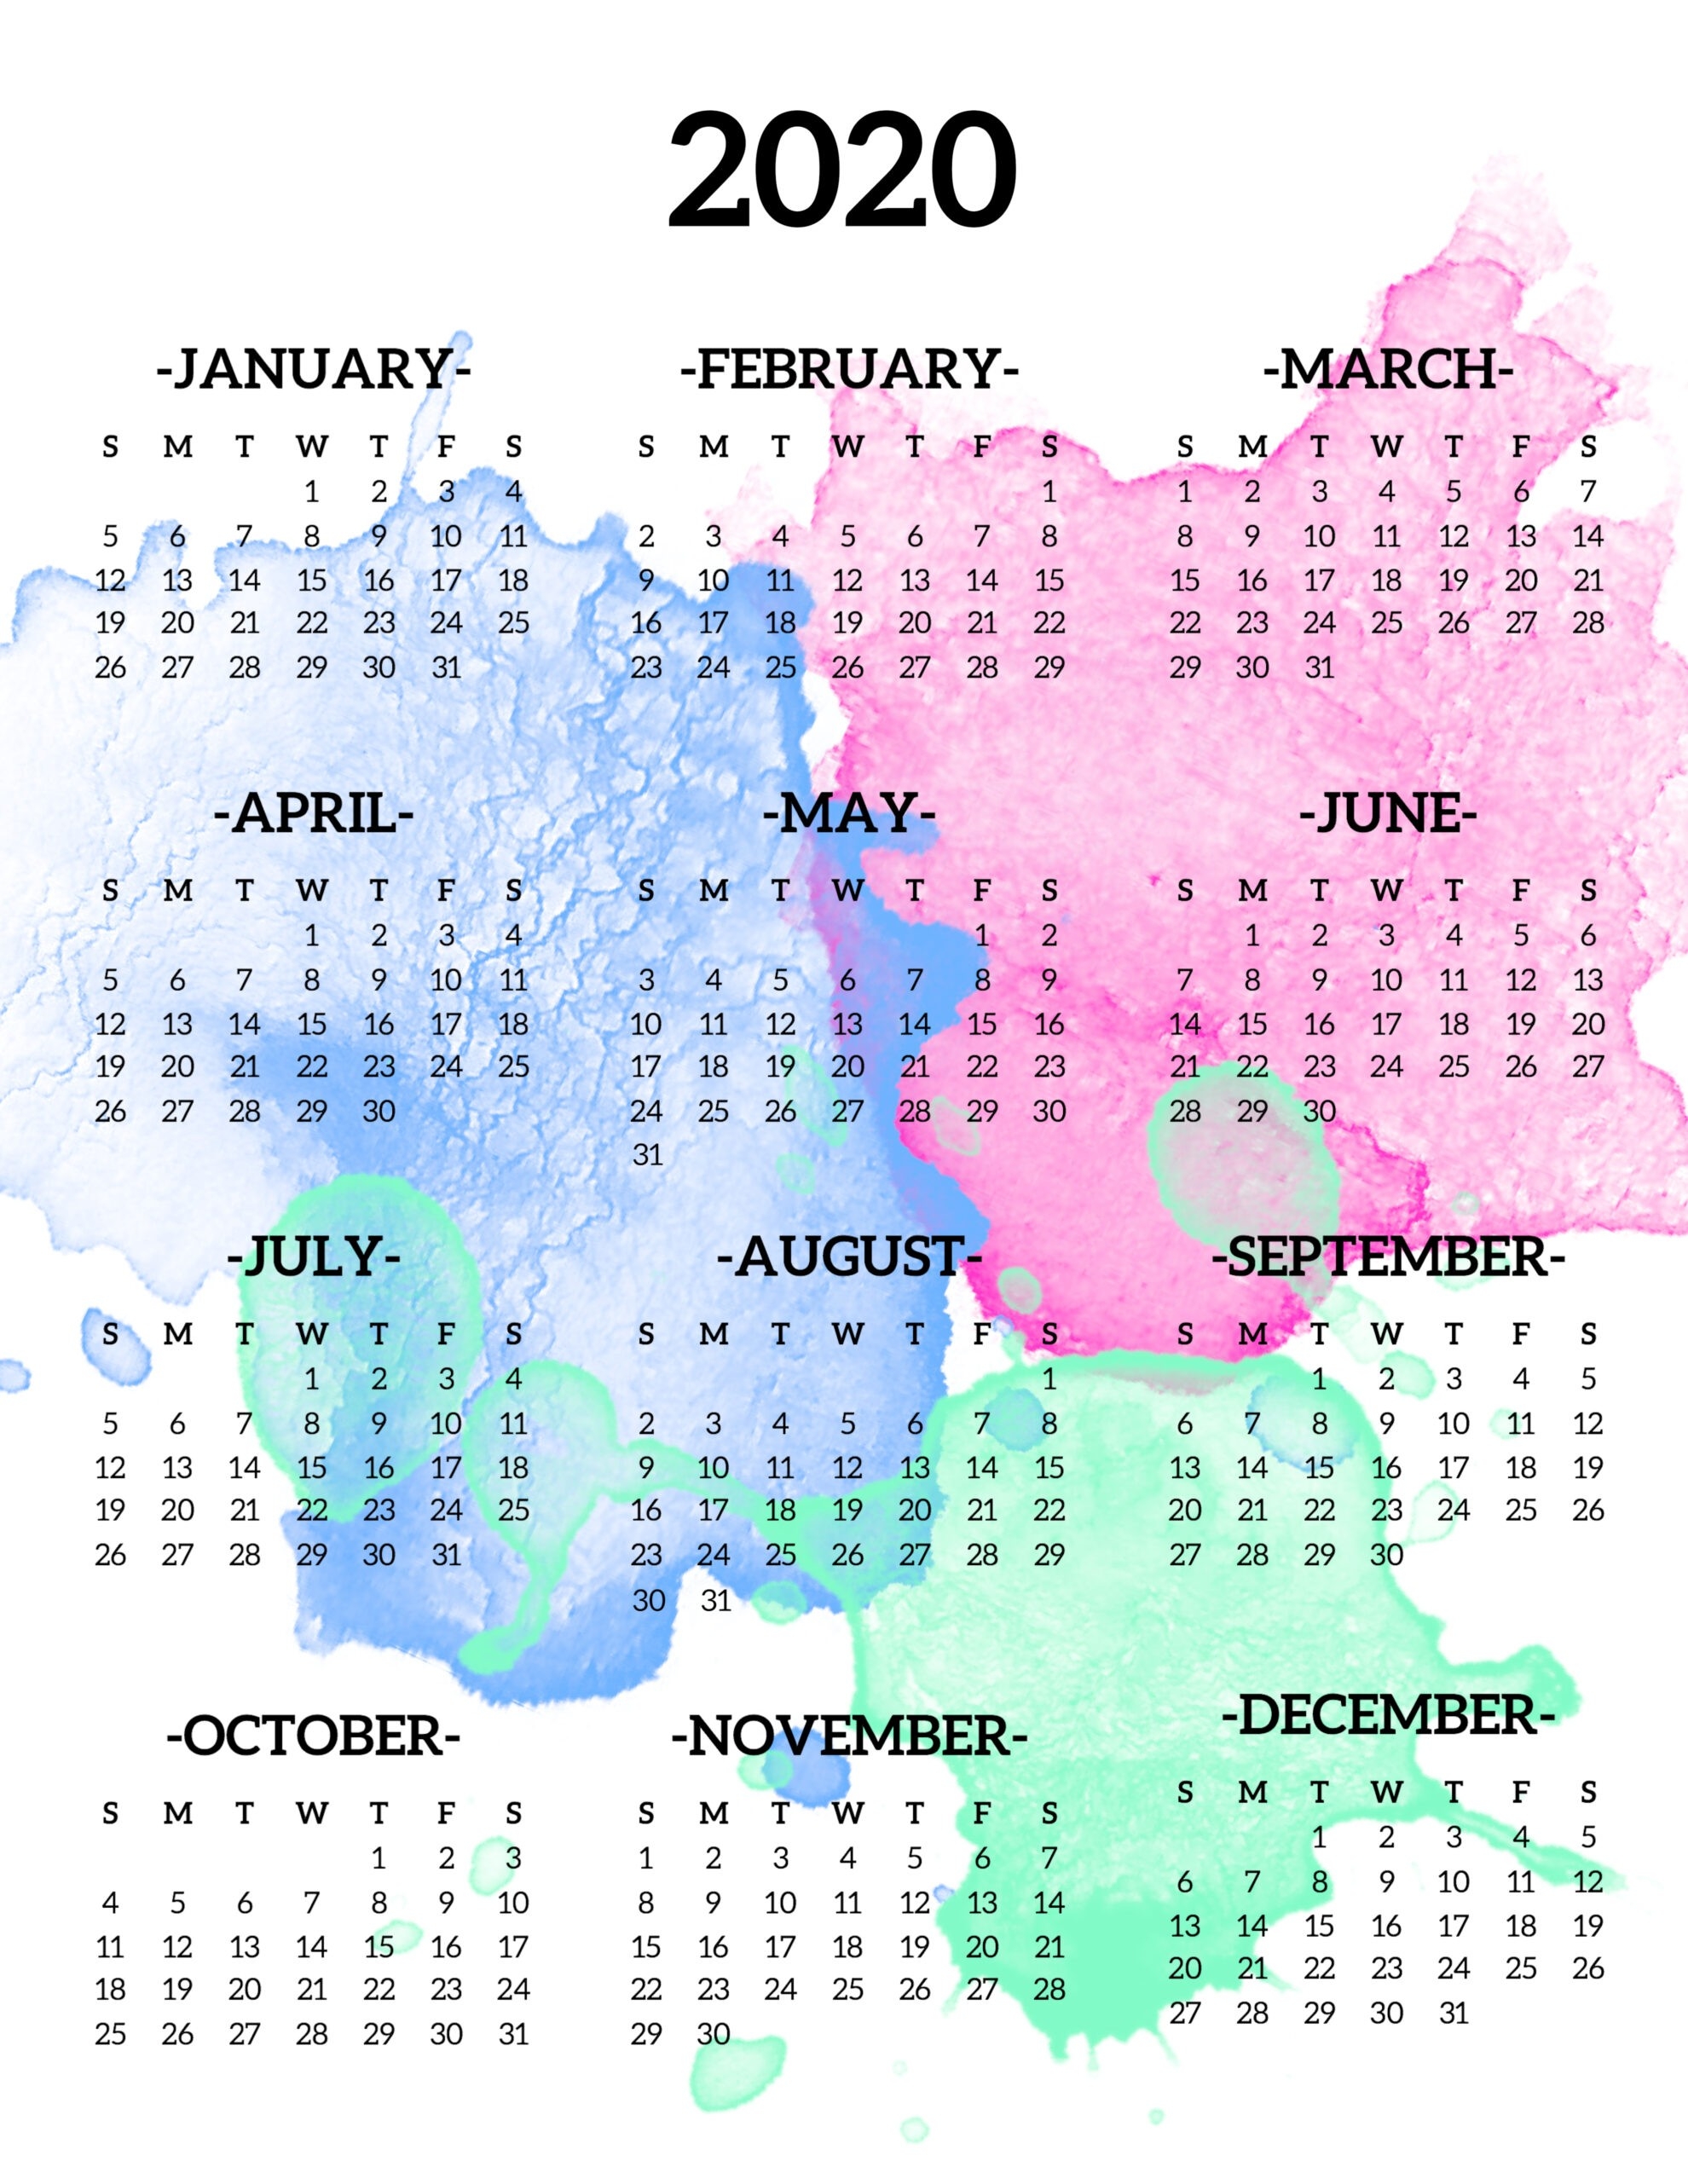 Calendar 2020 Printable One Page - Paper Trail Design-2020 Year At A Glance Calendar Template